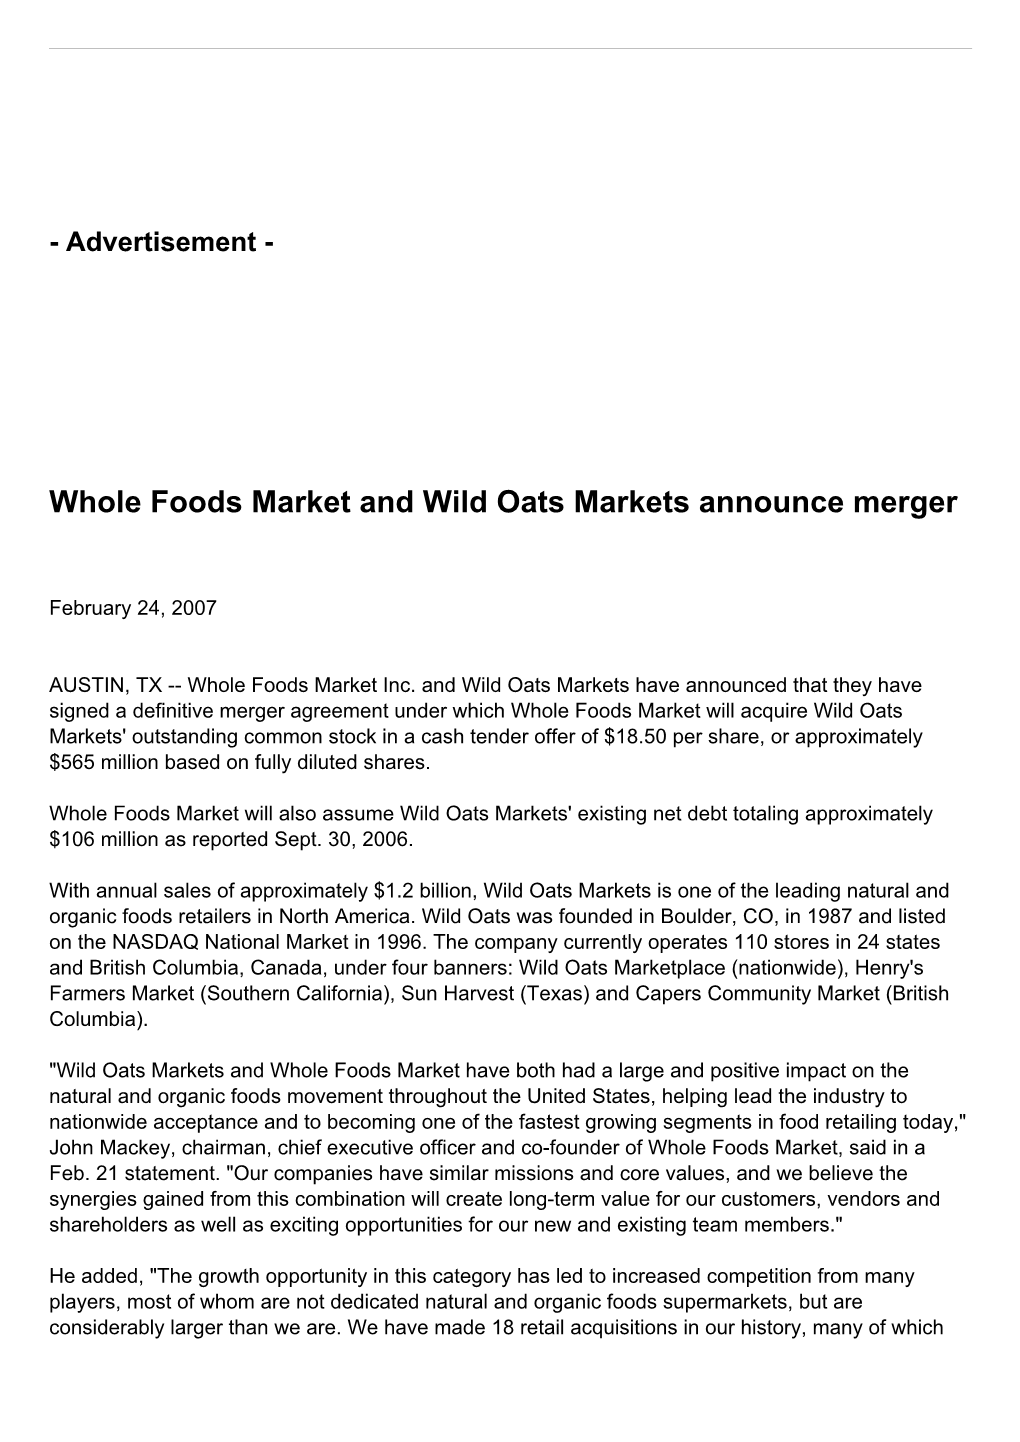 Whole Foods Market and Wild Oats Markets Announce Merger